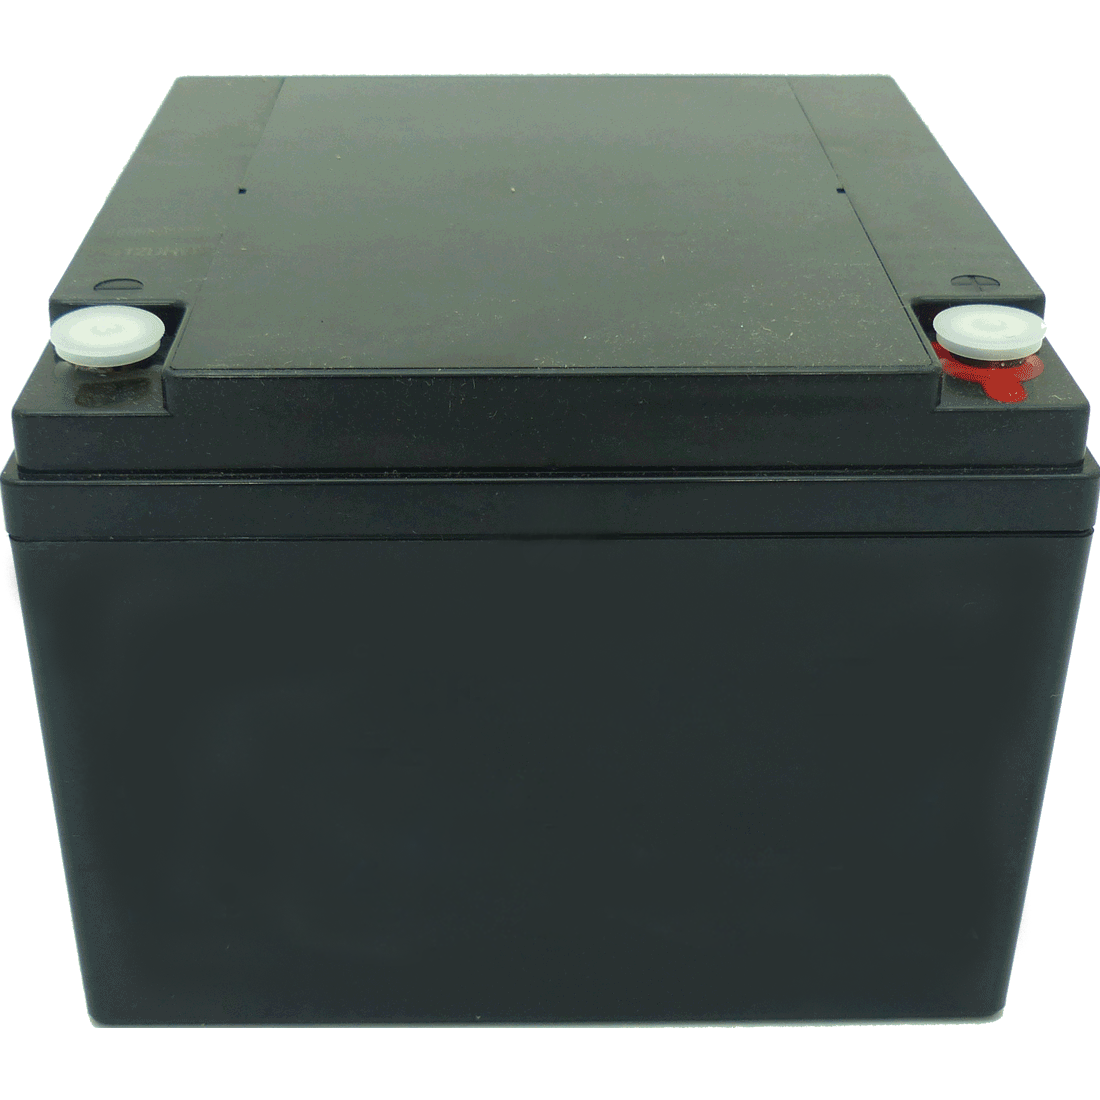 CJ12-26 12VDC /26Ah VALVE REGULATED LEAD ACID BATTERY 260A (5 Sec) DISCHARGE OPERATE TEMP -20° ~ +60° 7.8A CHARGE CURRENT FASTON TABS F3 & F13 BLACK 8.1KG